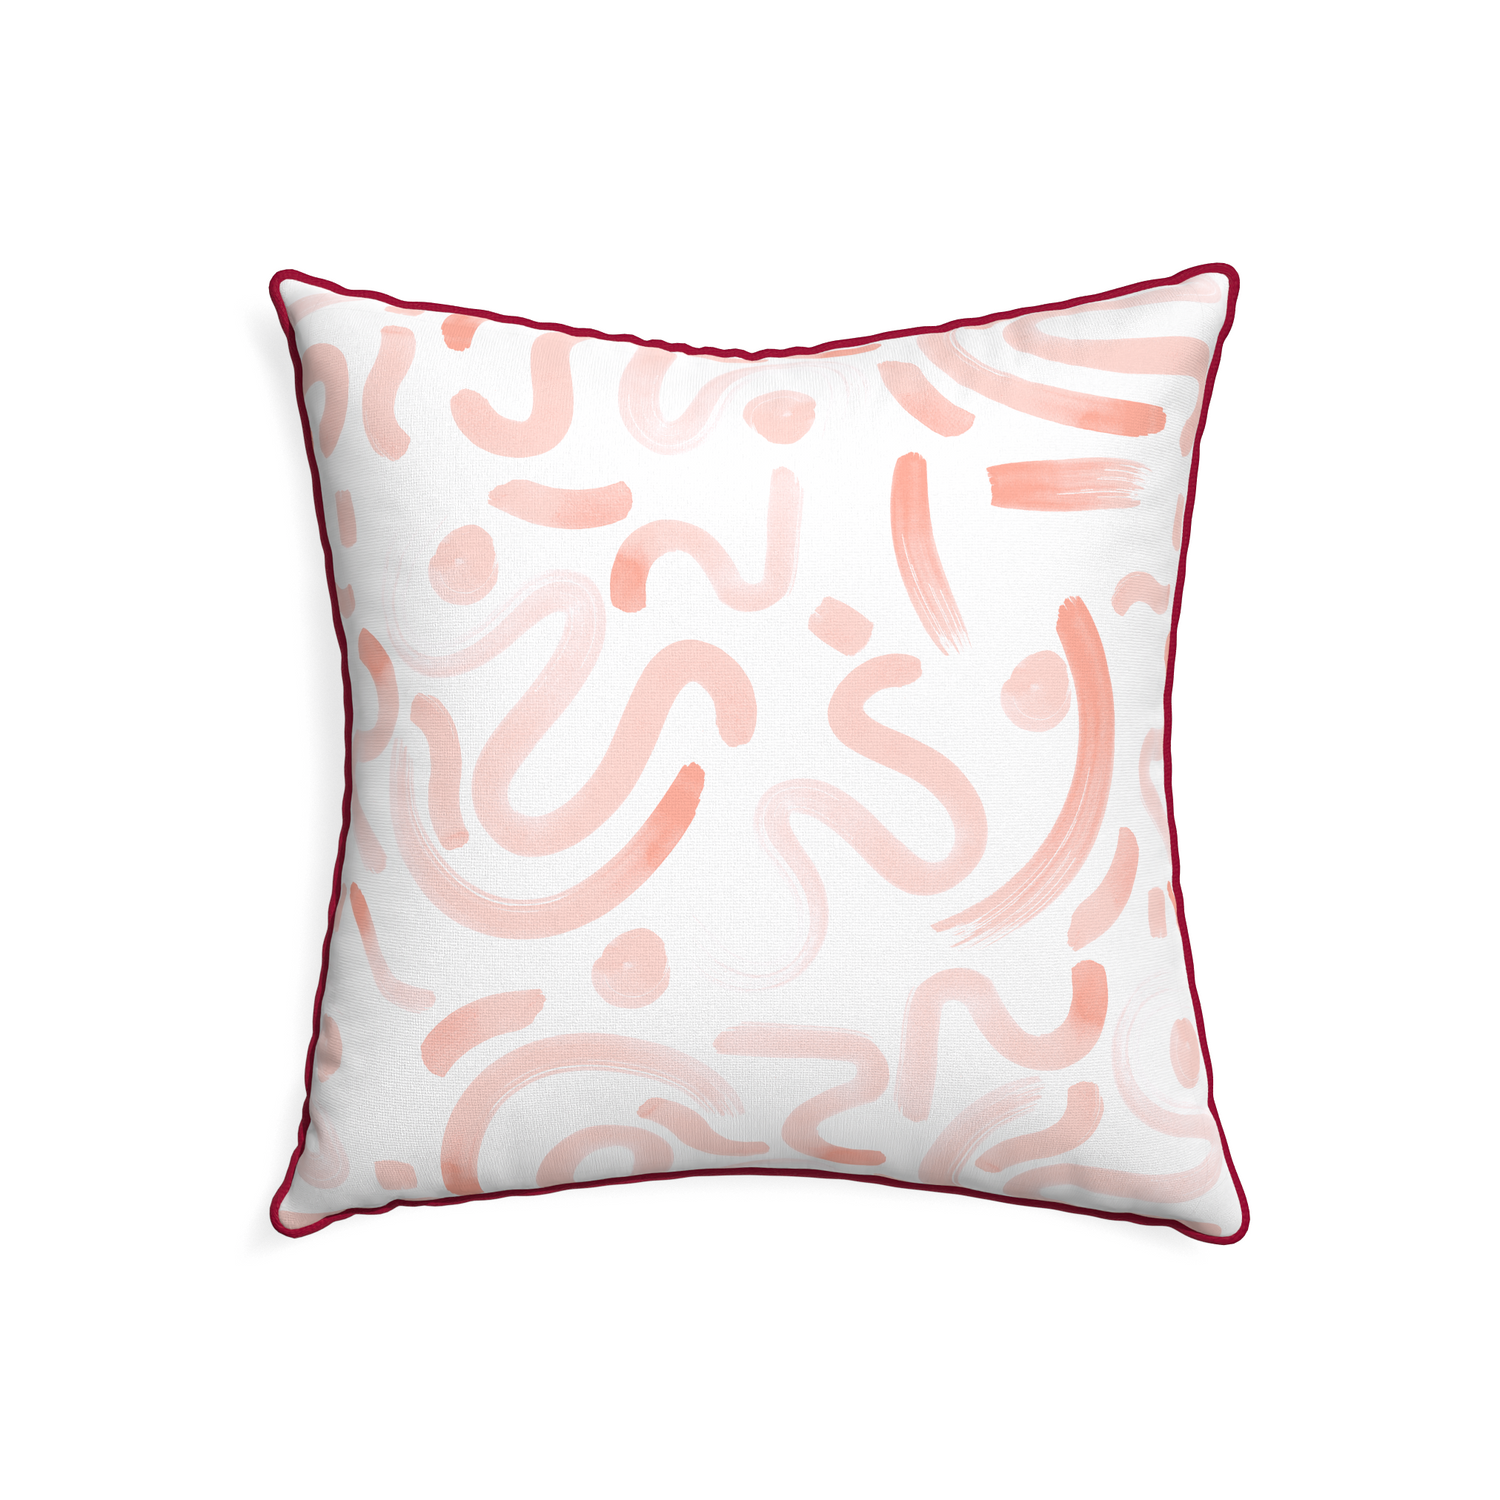 22-square hockney pink custom pink graphicpillow with raspberry piping on white background